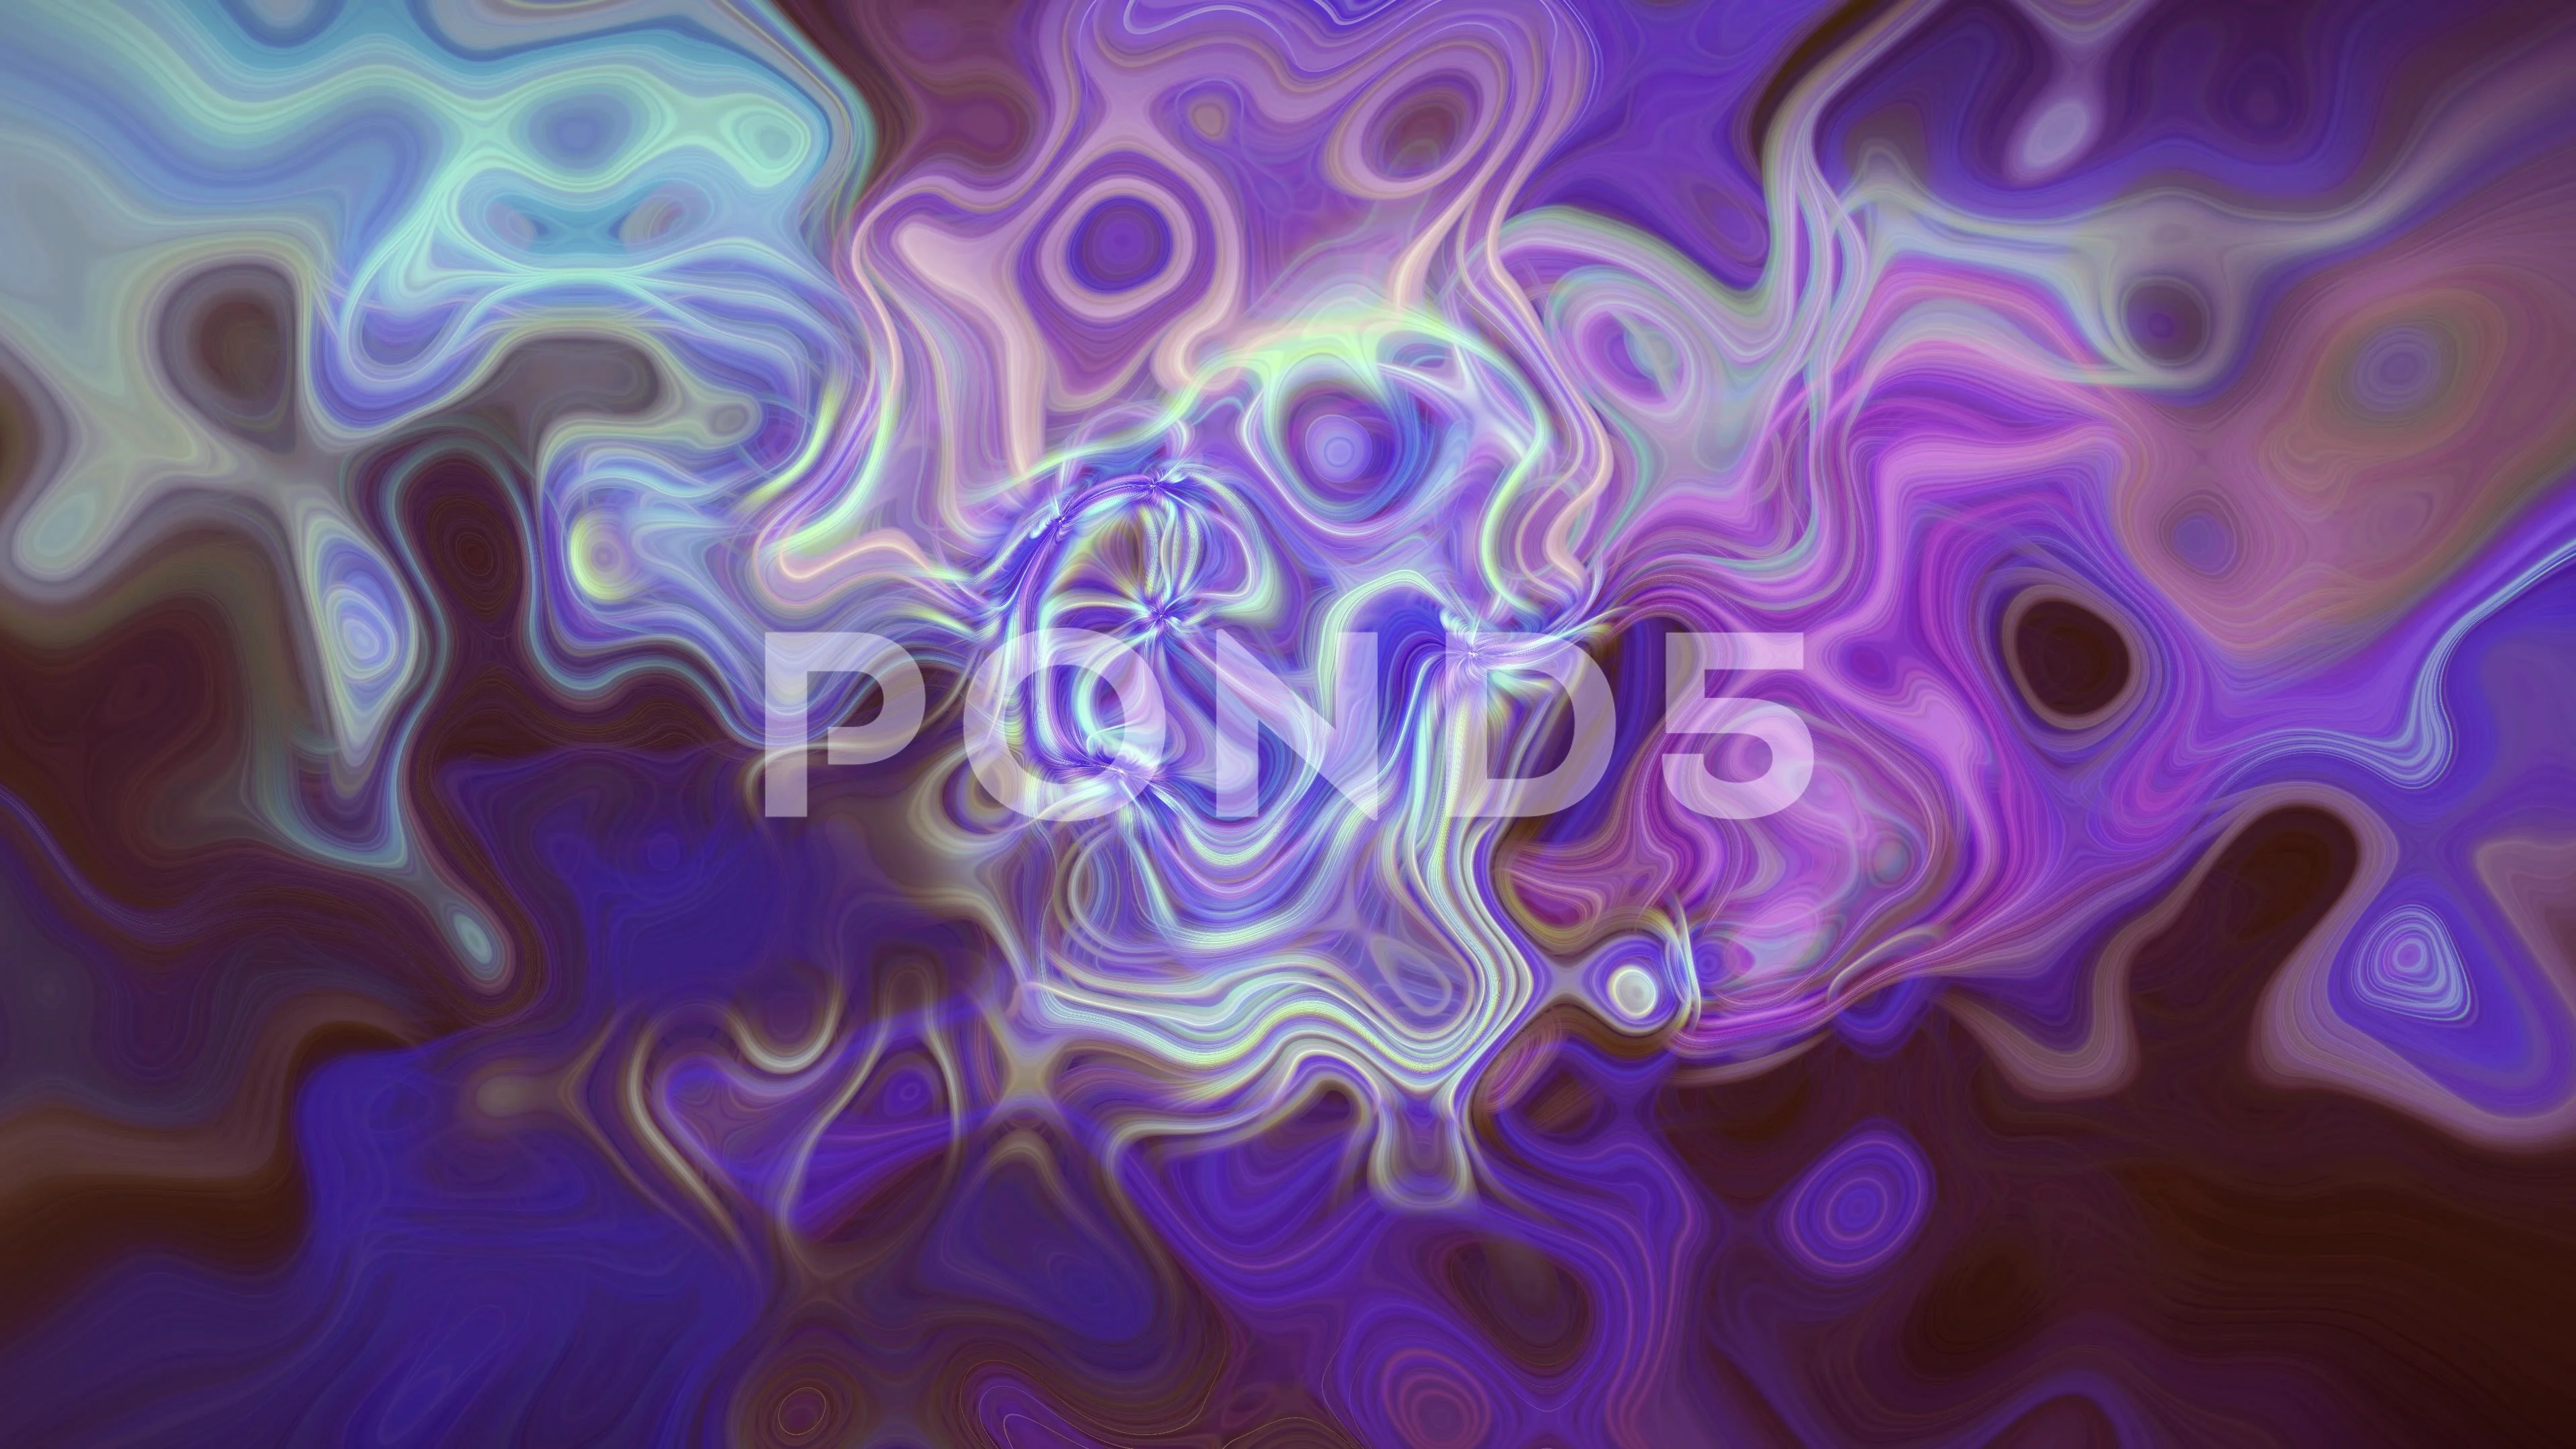 Liquify Colorful Abstract Background Wallpaper Premium Stock Illustration  2181277875 | Shutterstock